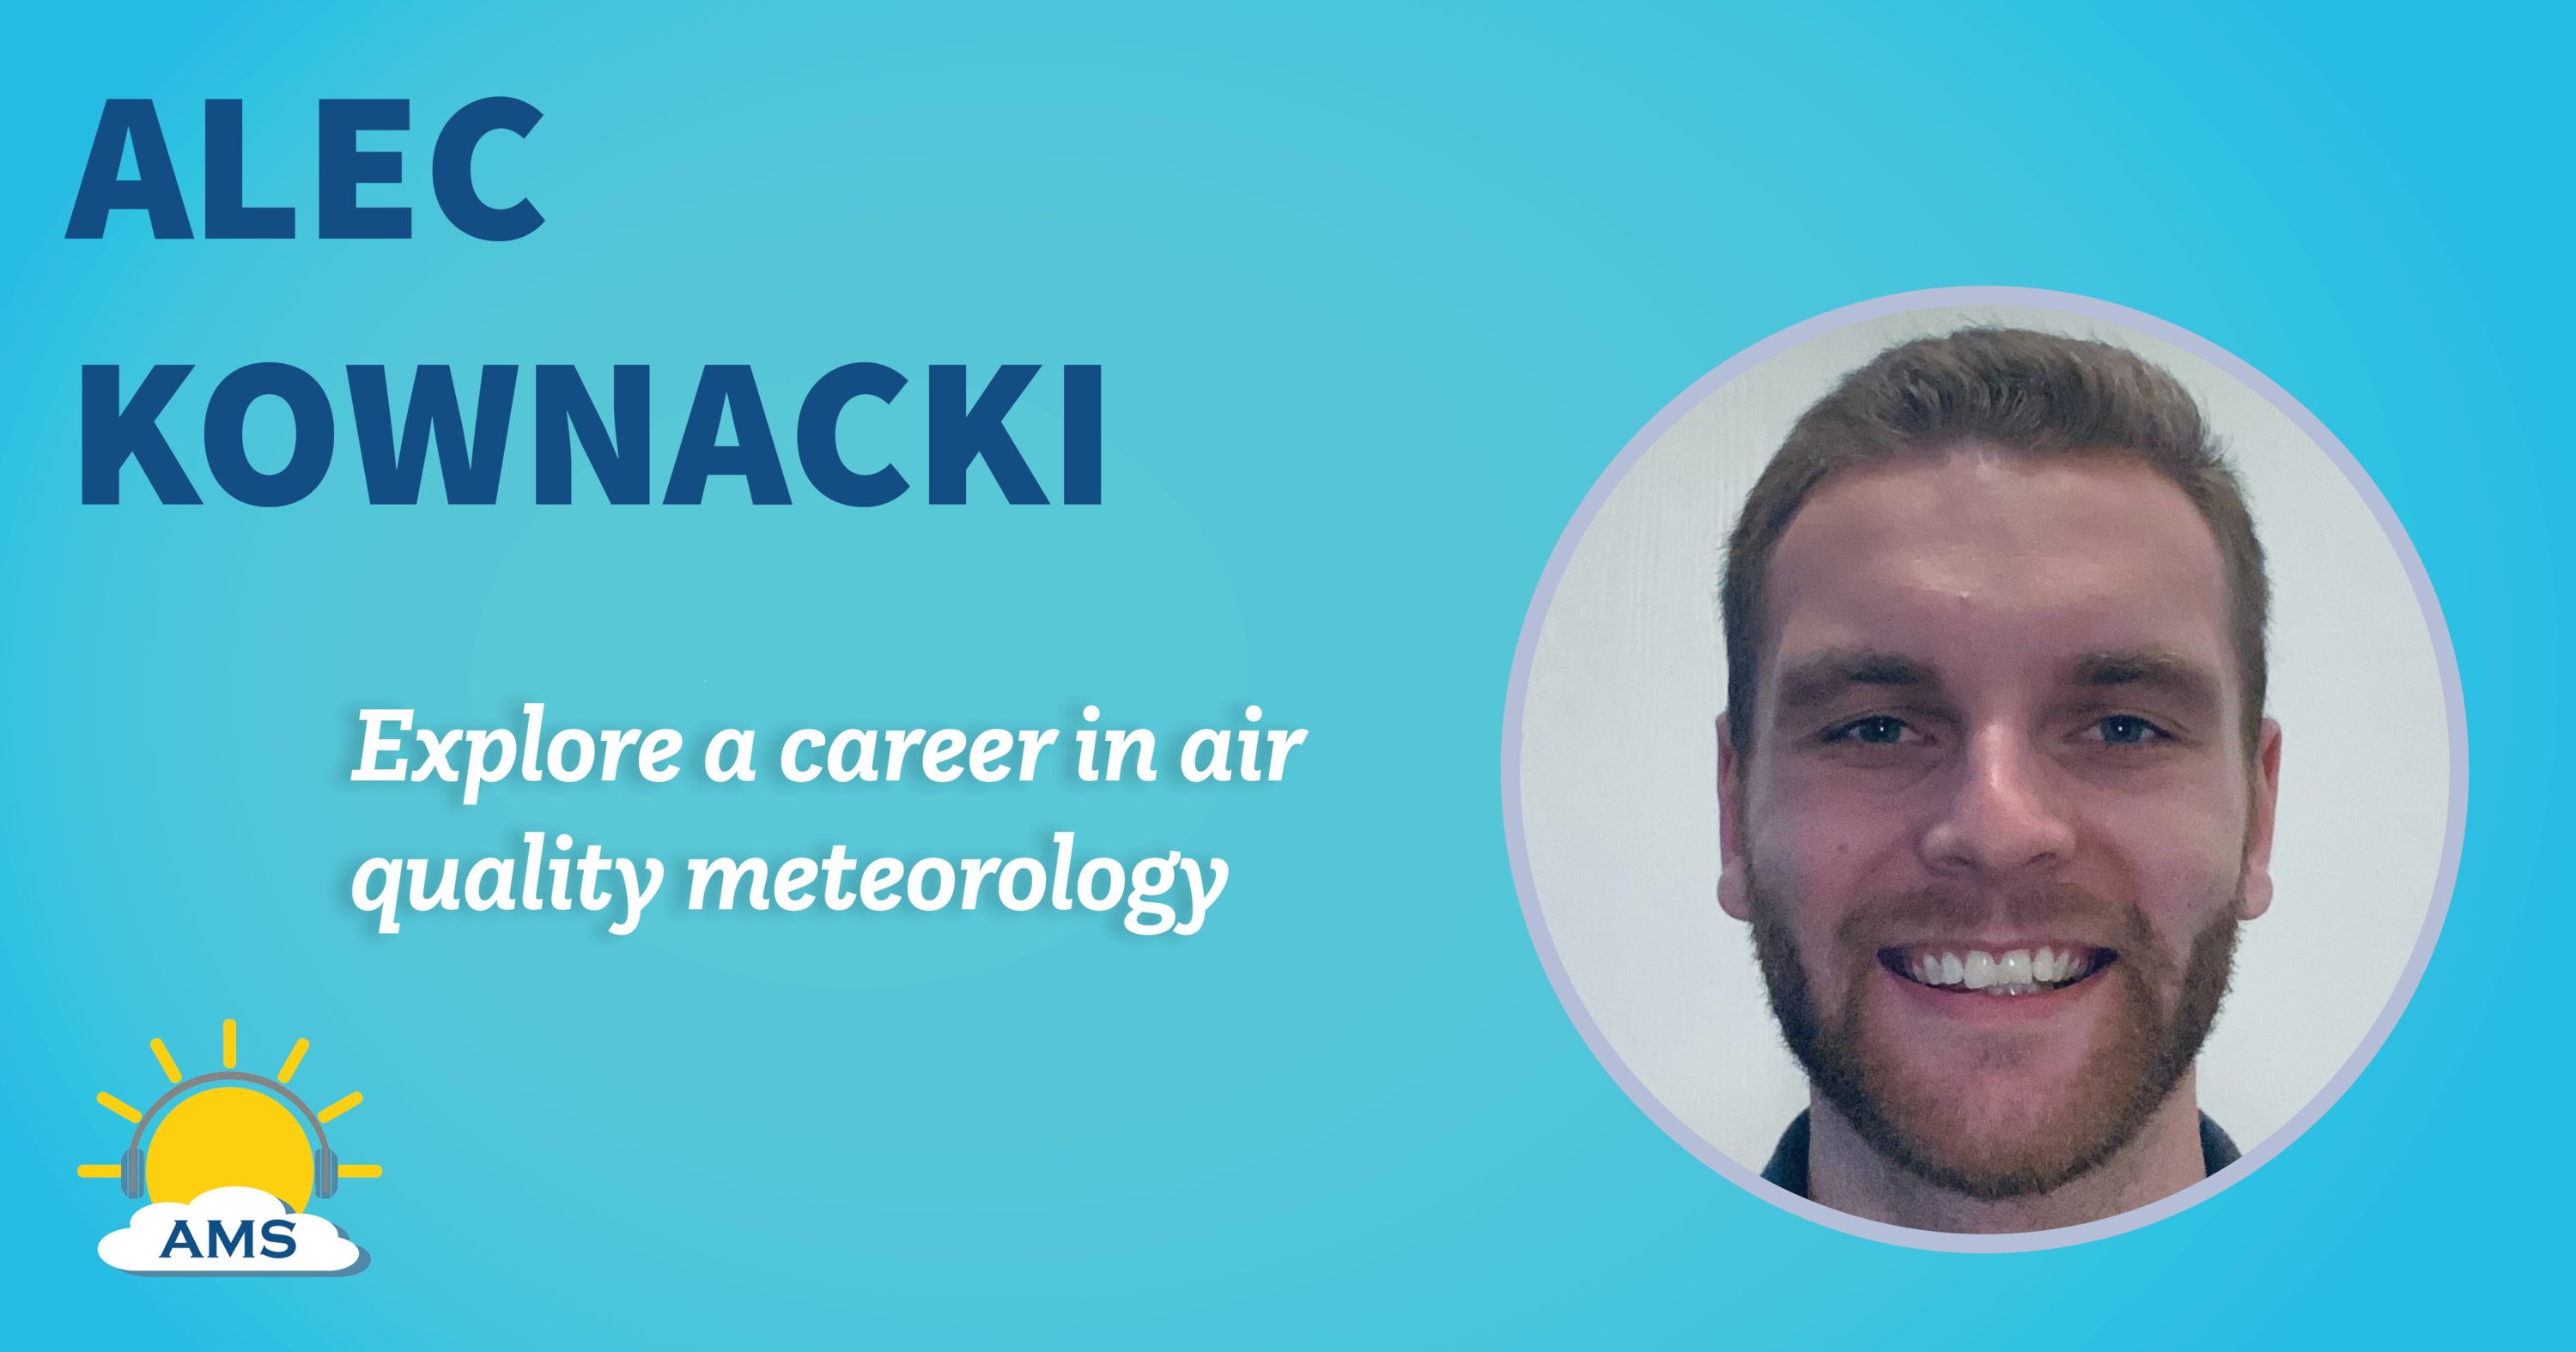 Alec Kownacki headshot graphic with teaser text that reads "explore a career in climate research "